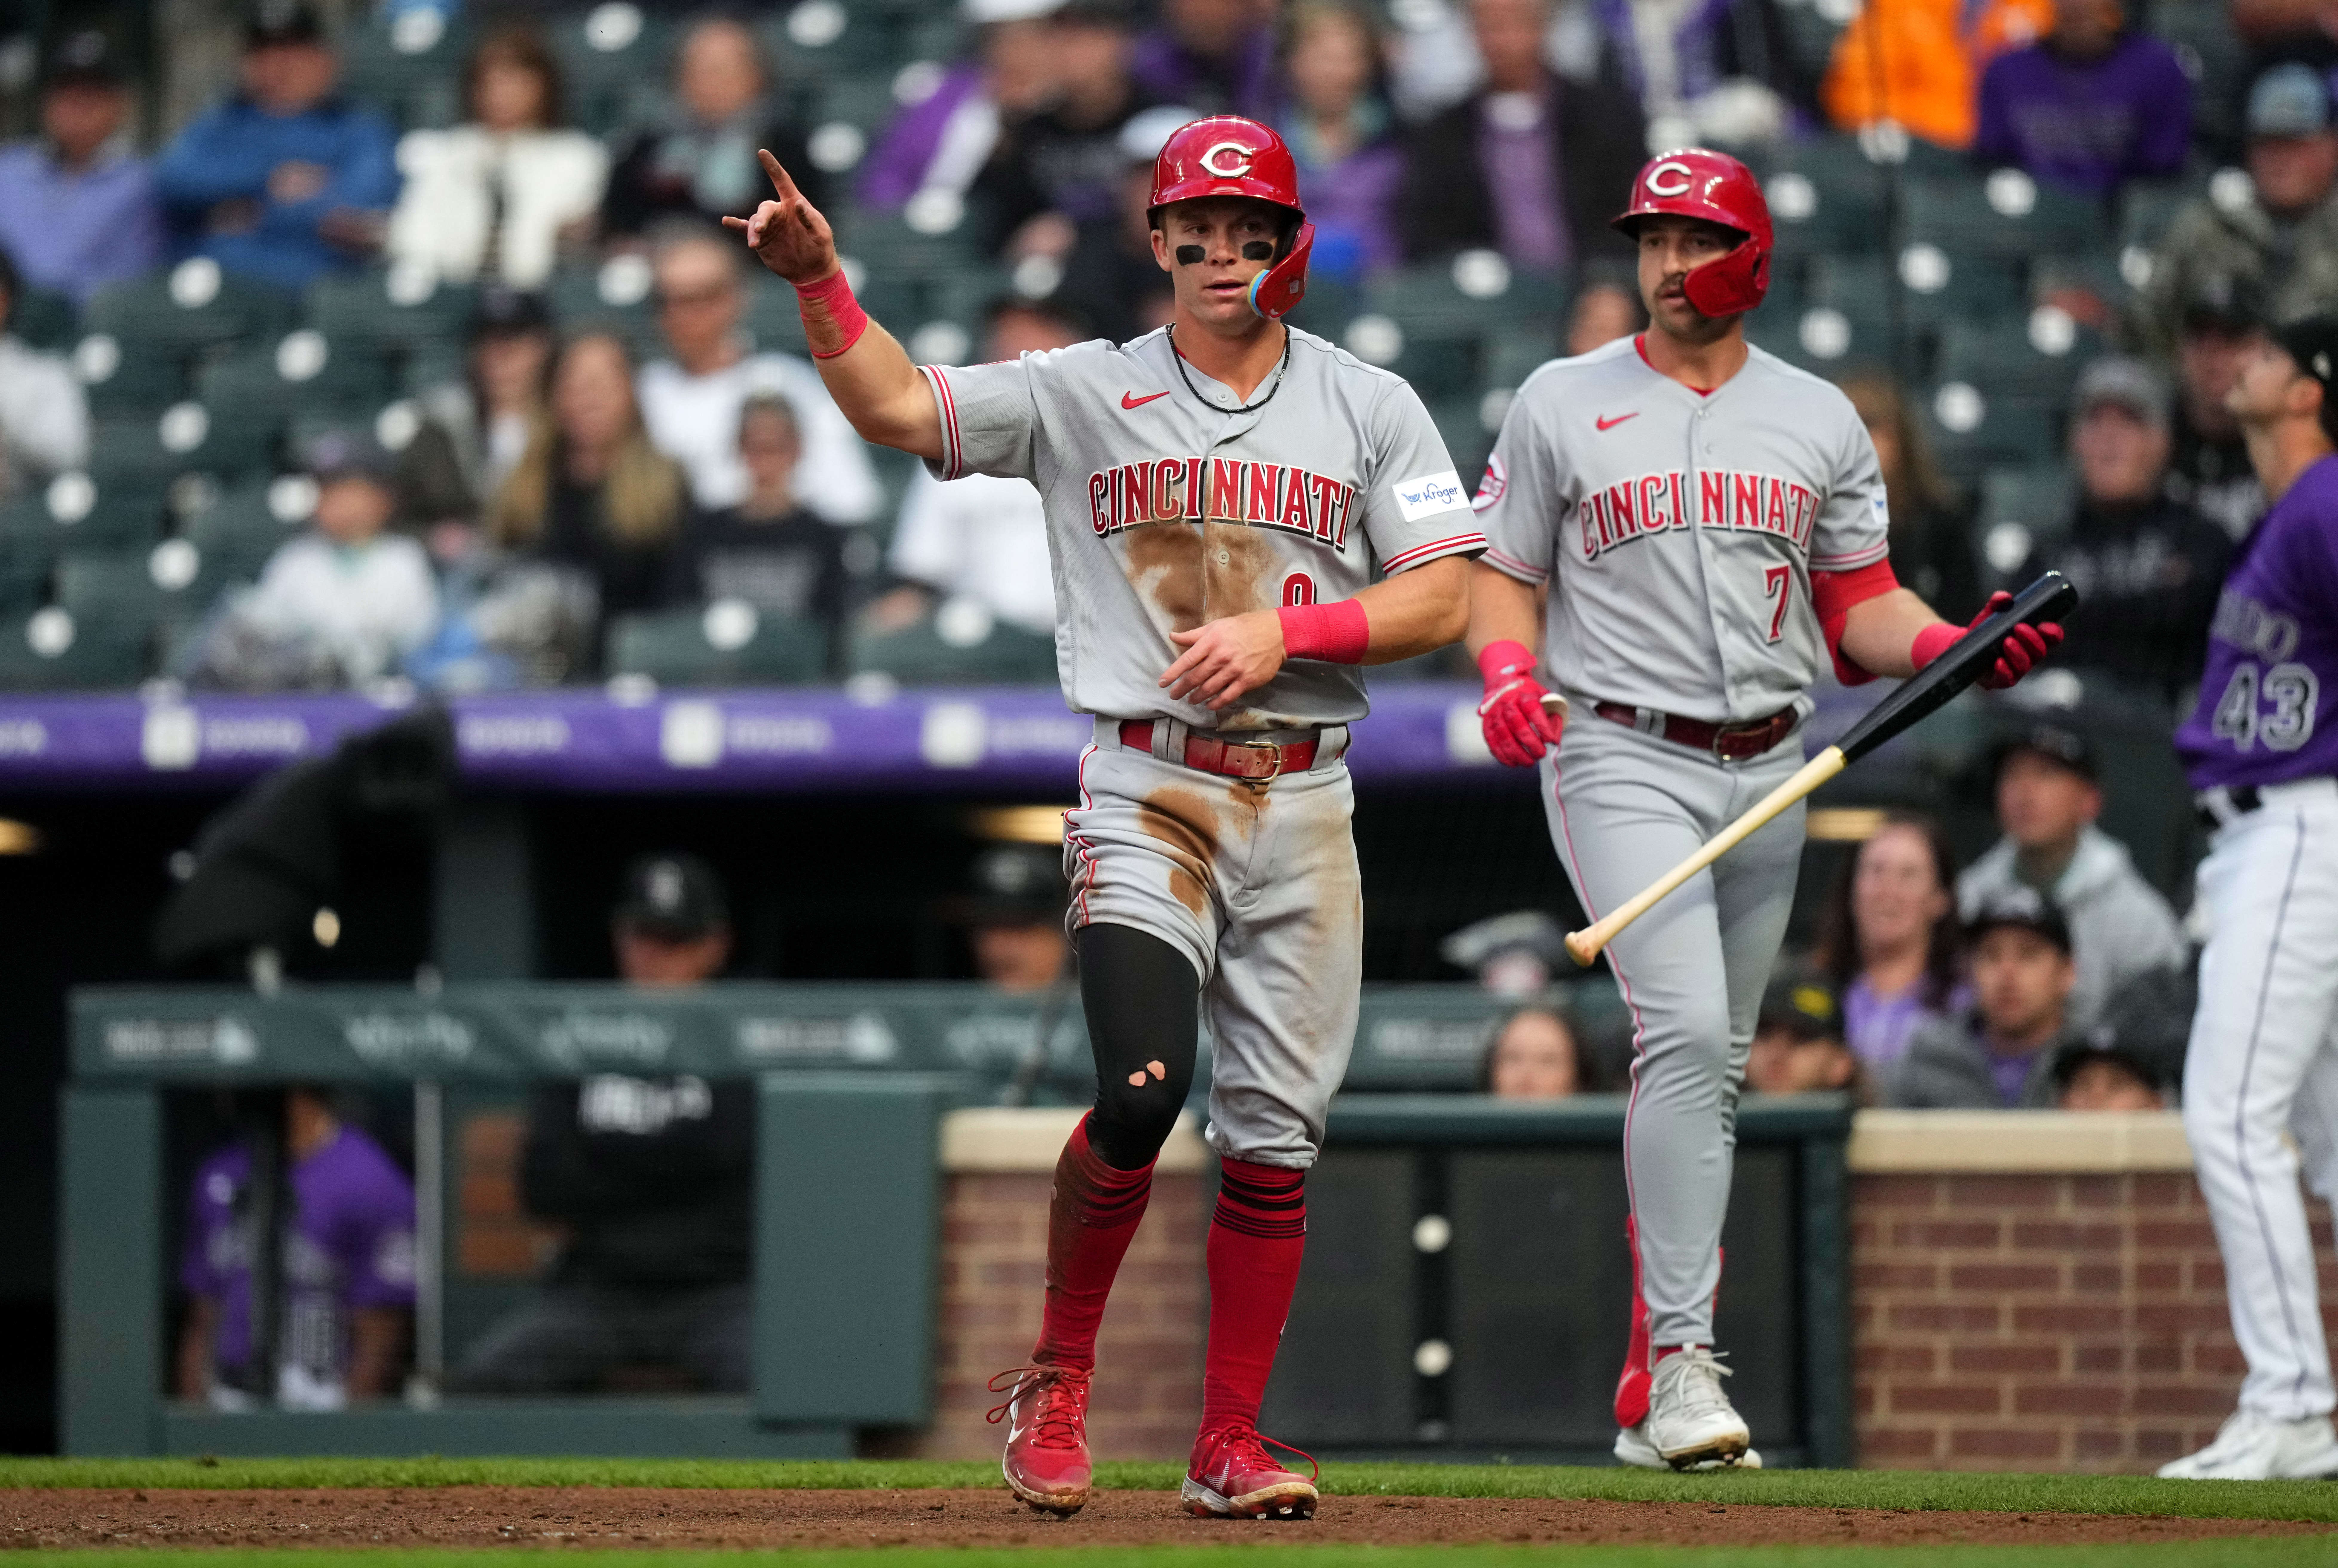 How the Cincinnati Reds turned expectations, team fortunes around exactly one year ago